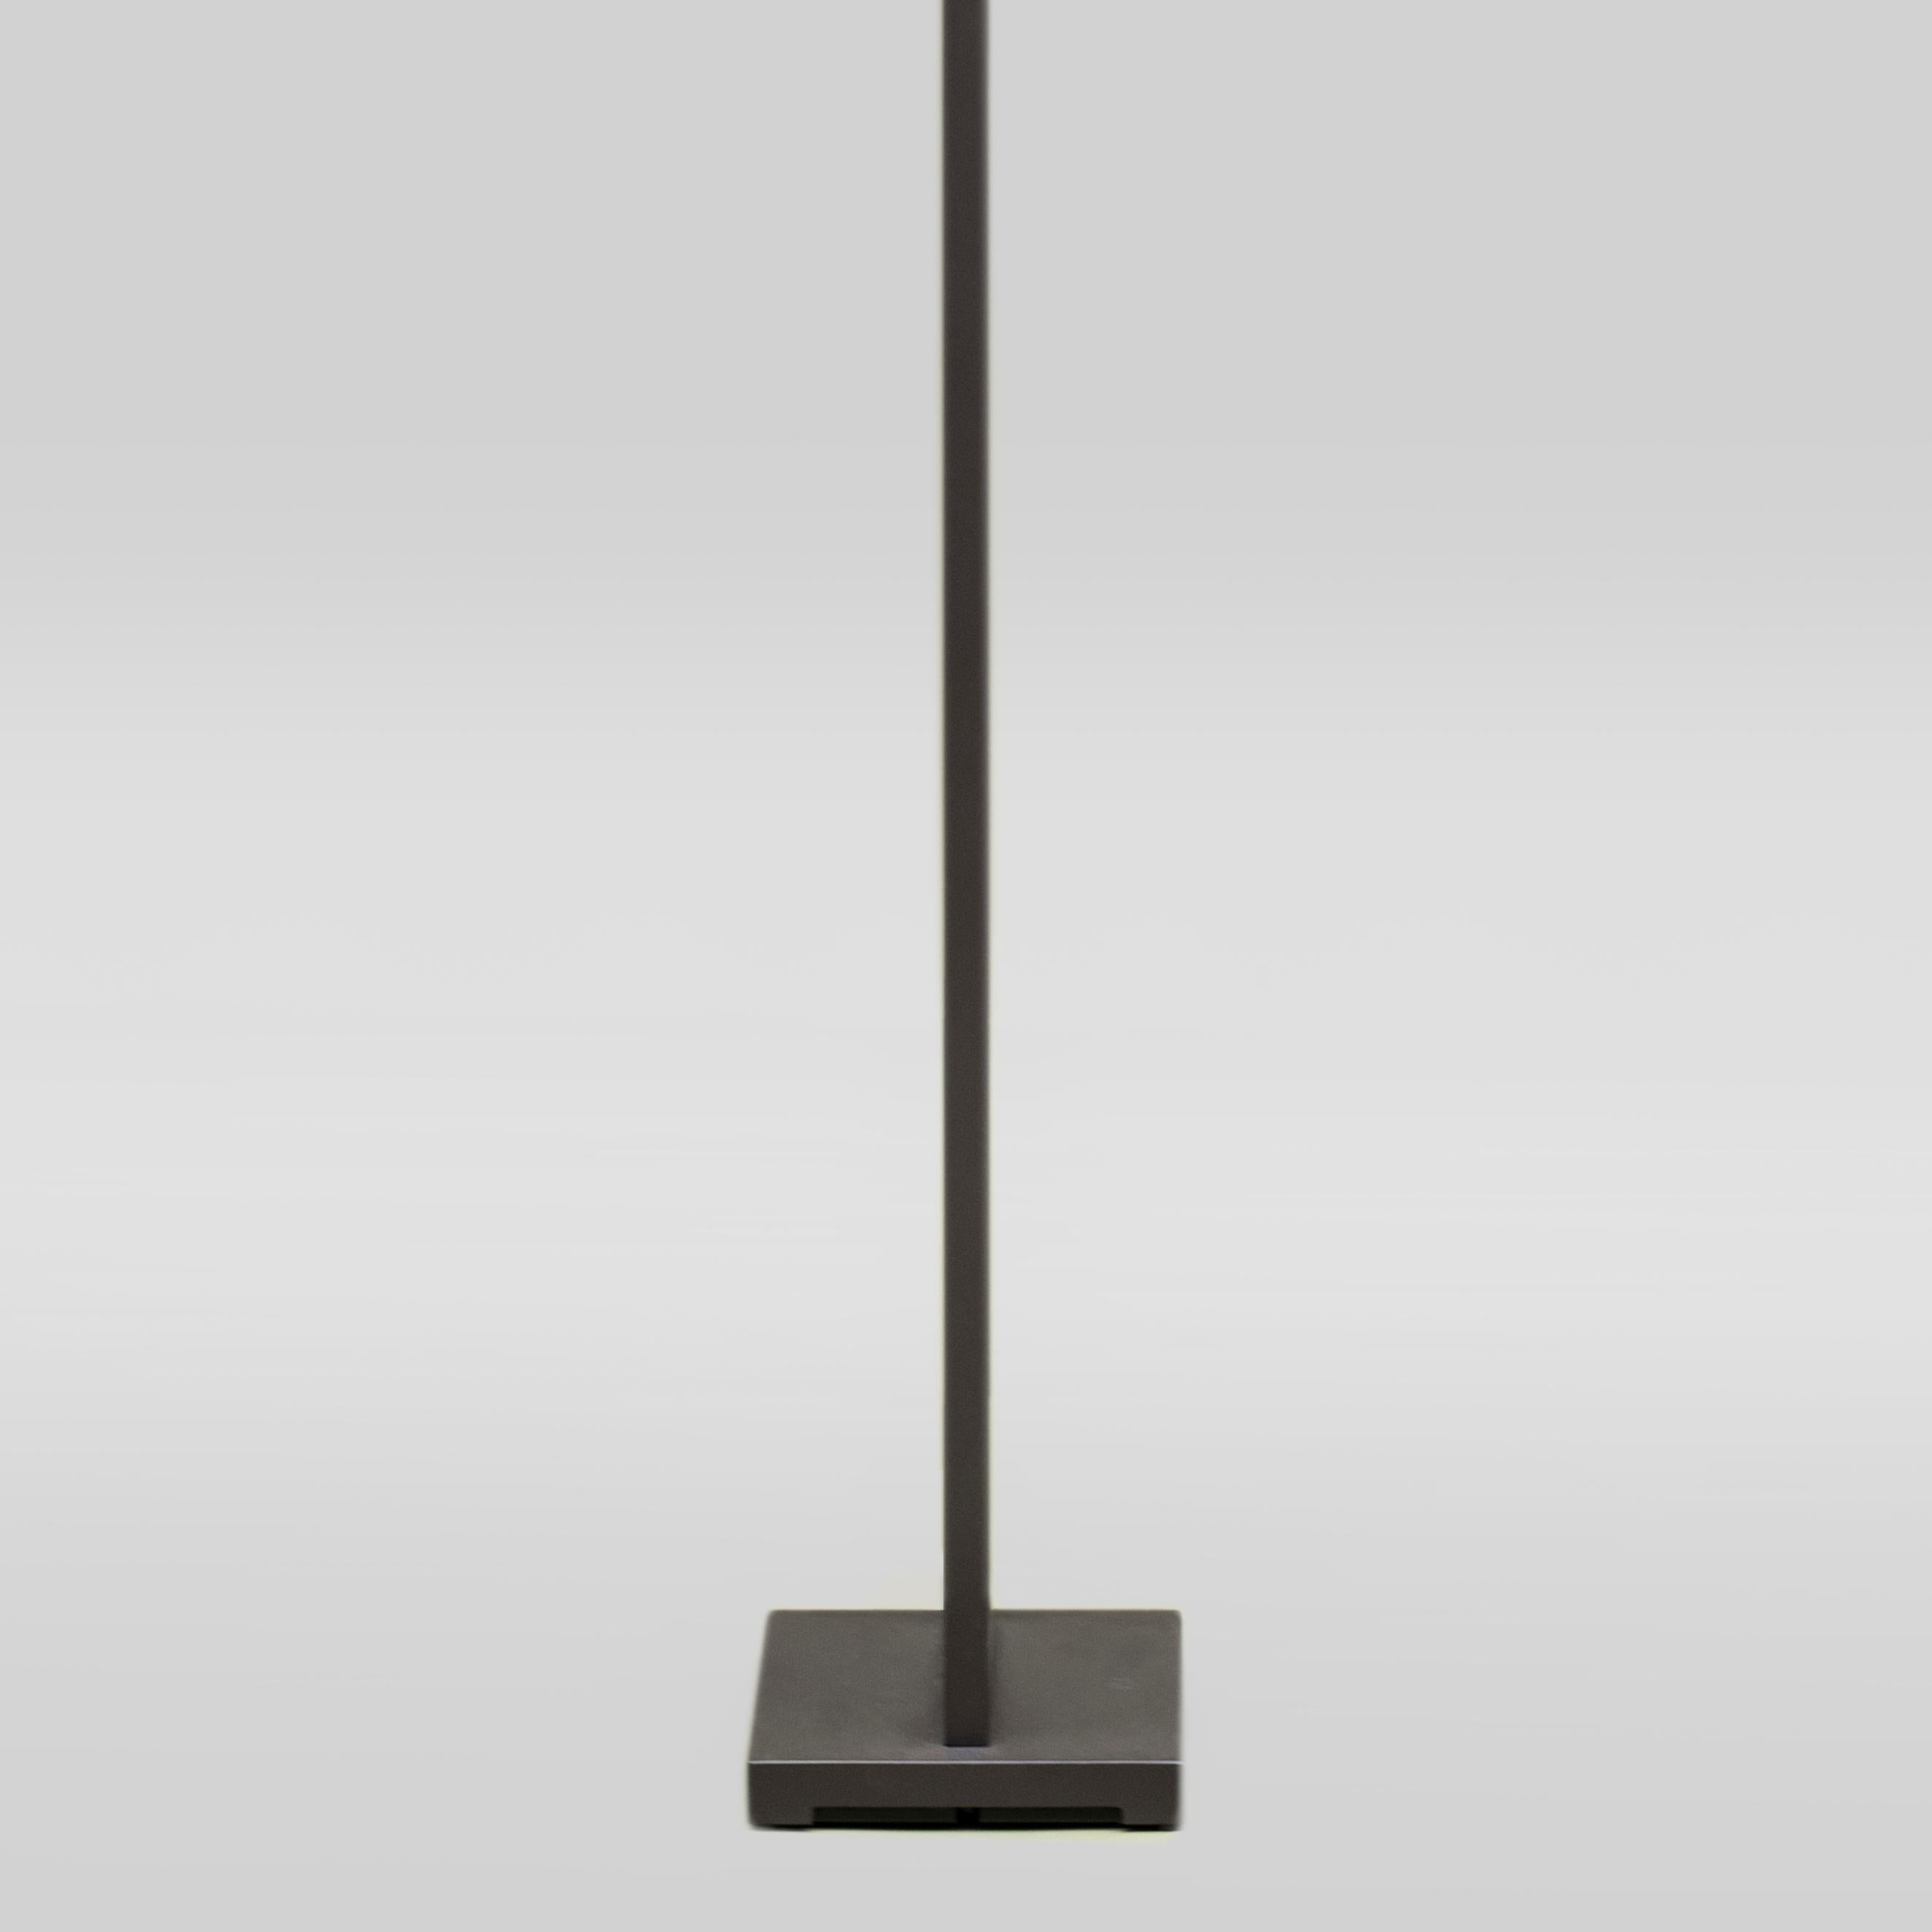 Steel Peter Ghyczy Floor Lamp Urban Lotis 'MW24' Ristretto / Silk Red